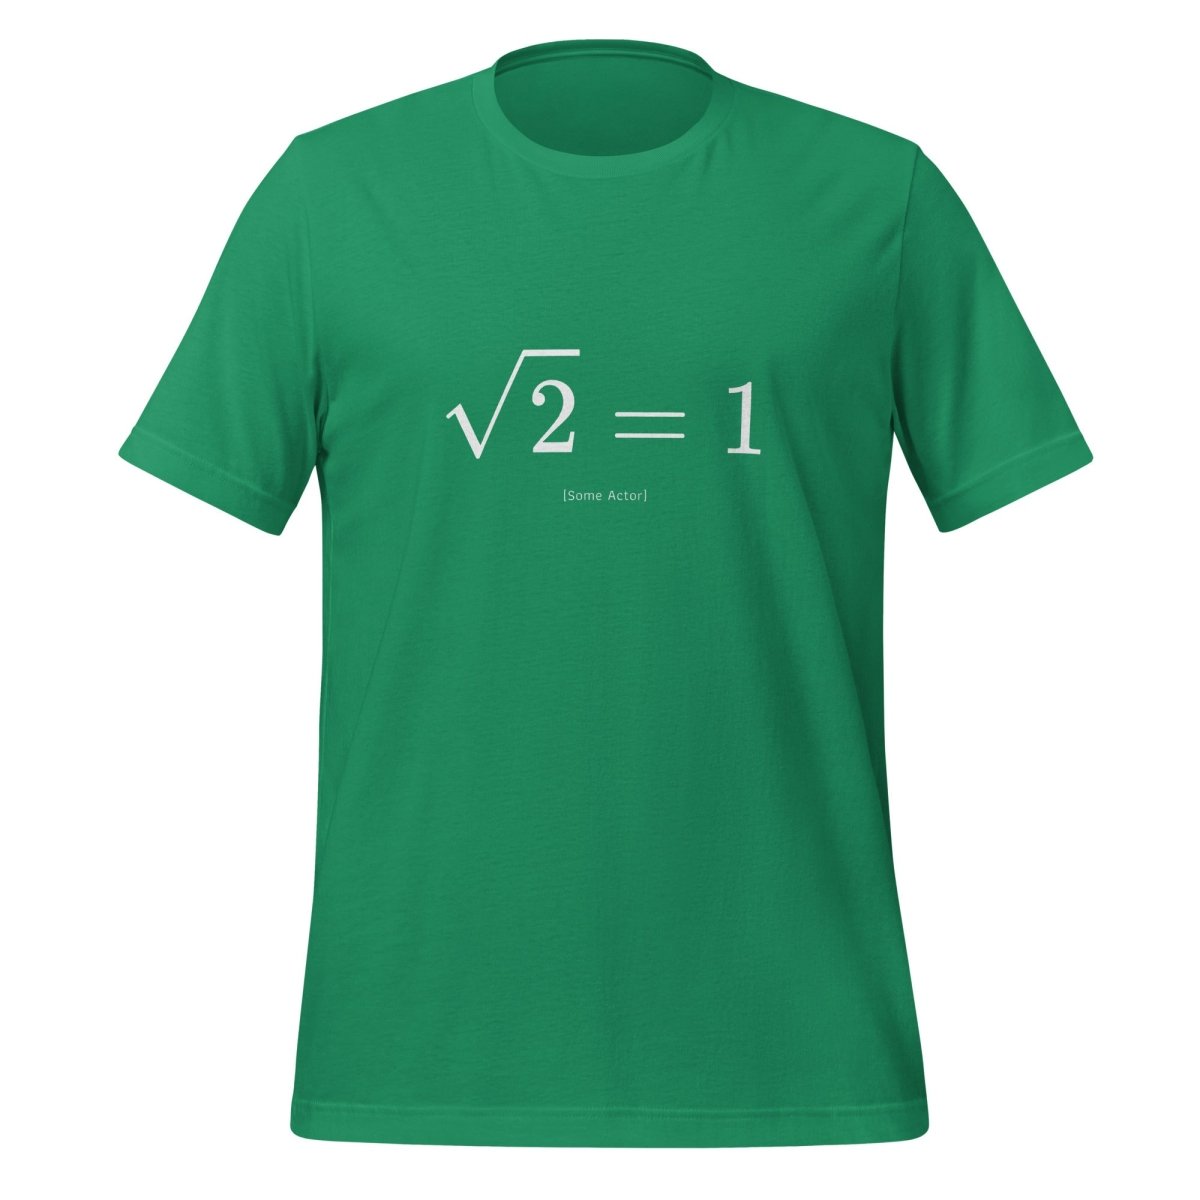 The Square Root of 2 Equals 1 T - Shirt (unisex) - Kelly - AI Store